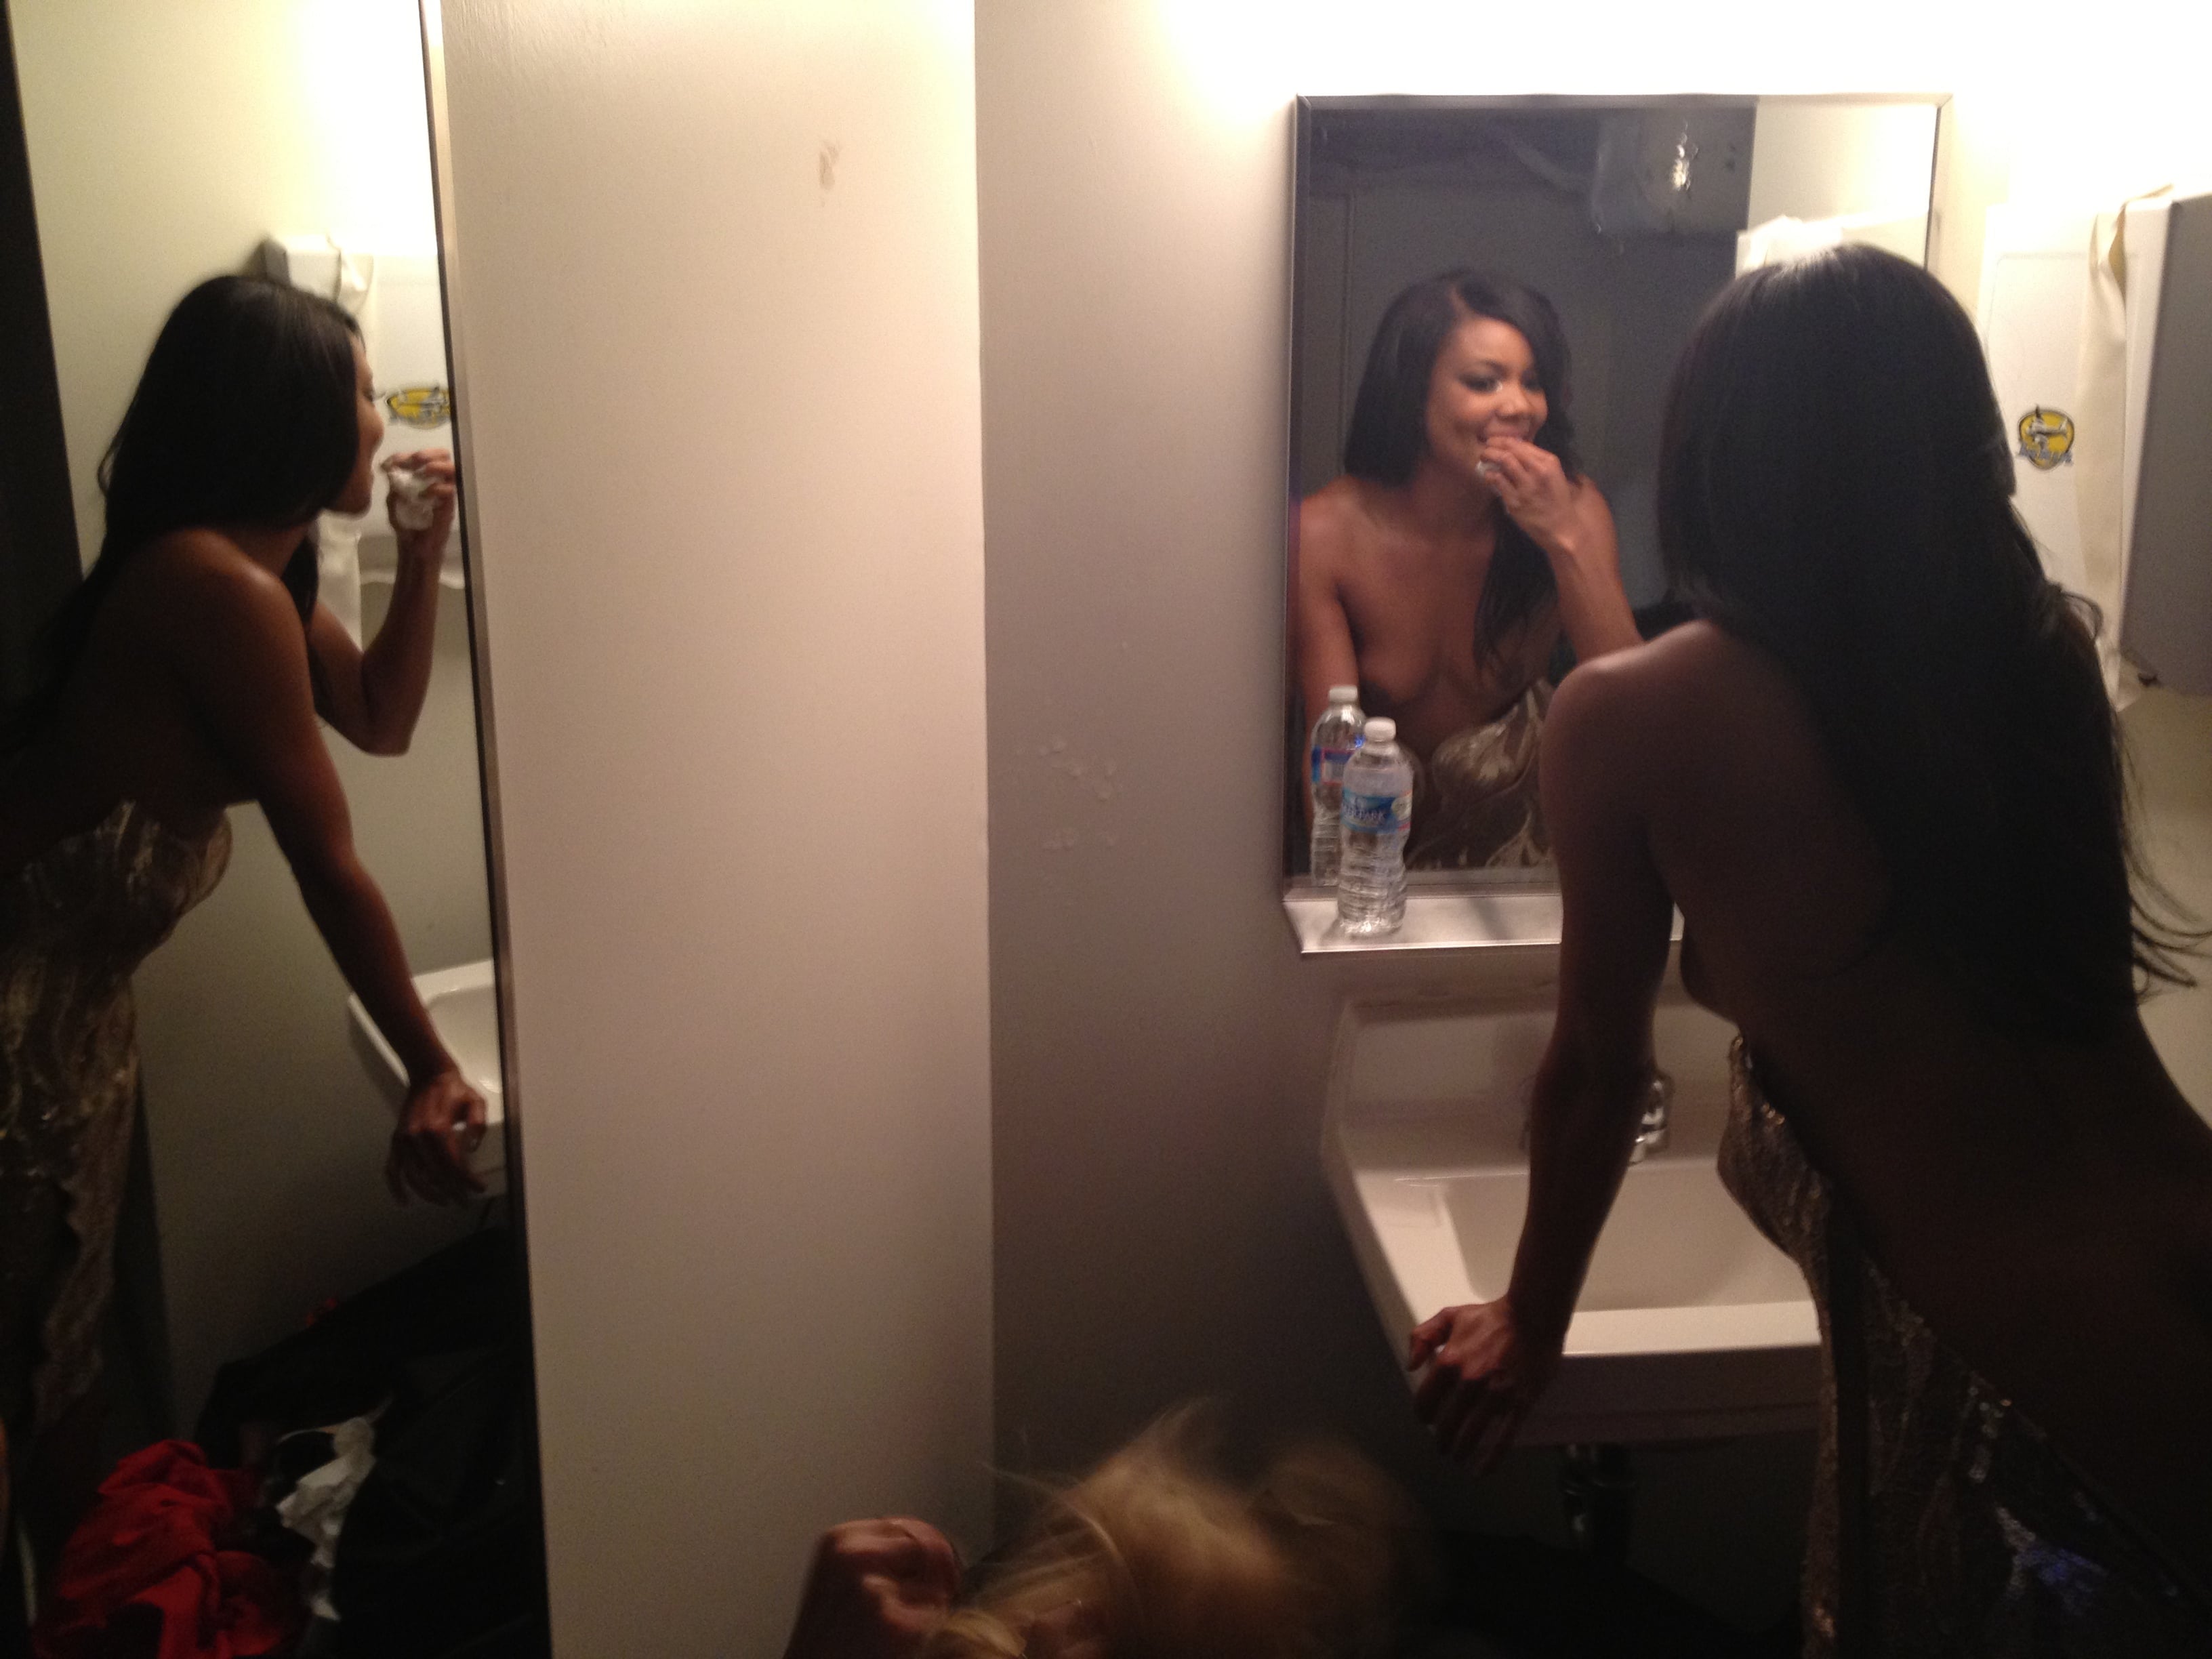 hacked pic of gabrielle union with her ass sticking out and tits revealed in her bathroom while brushing her teeth